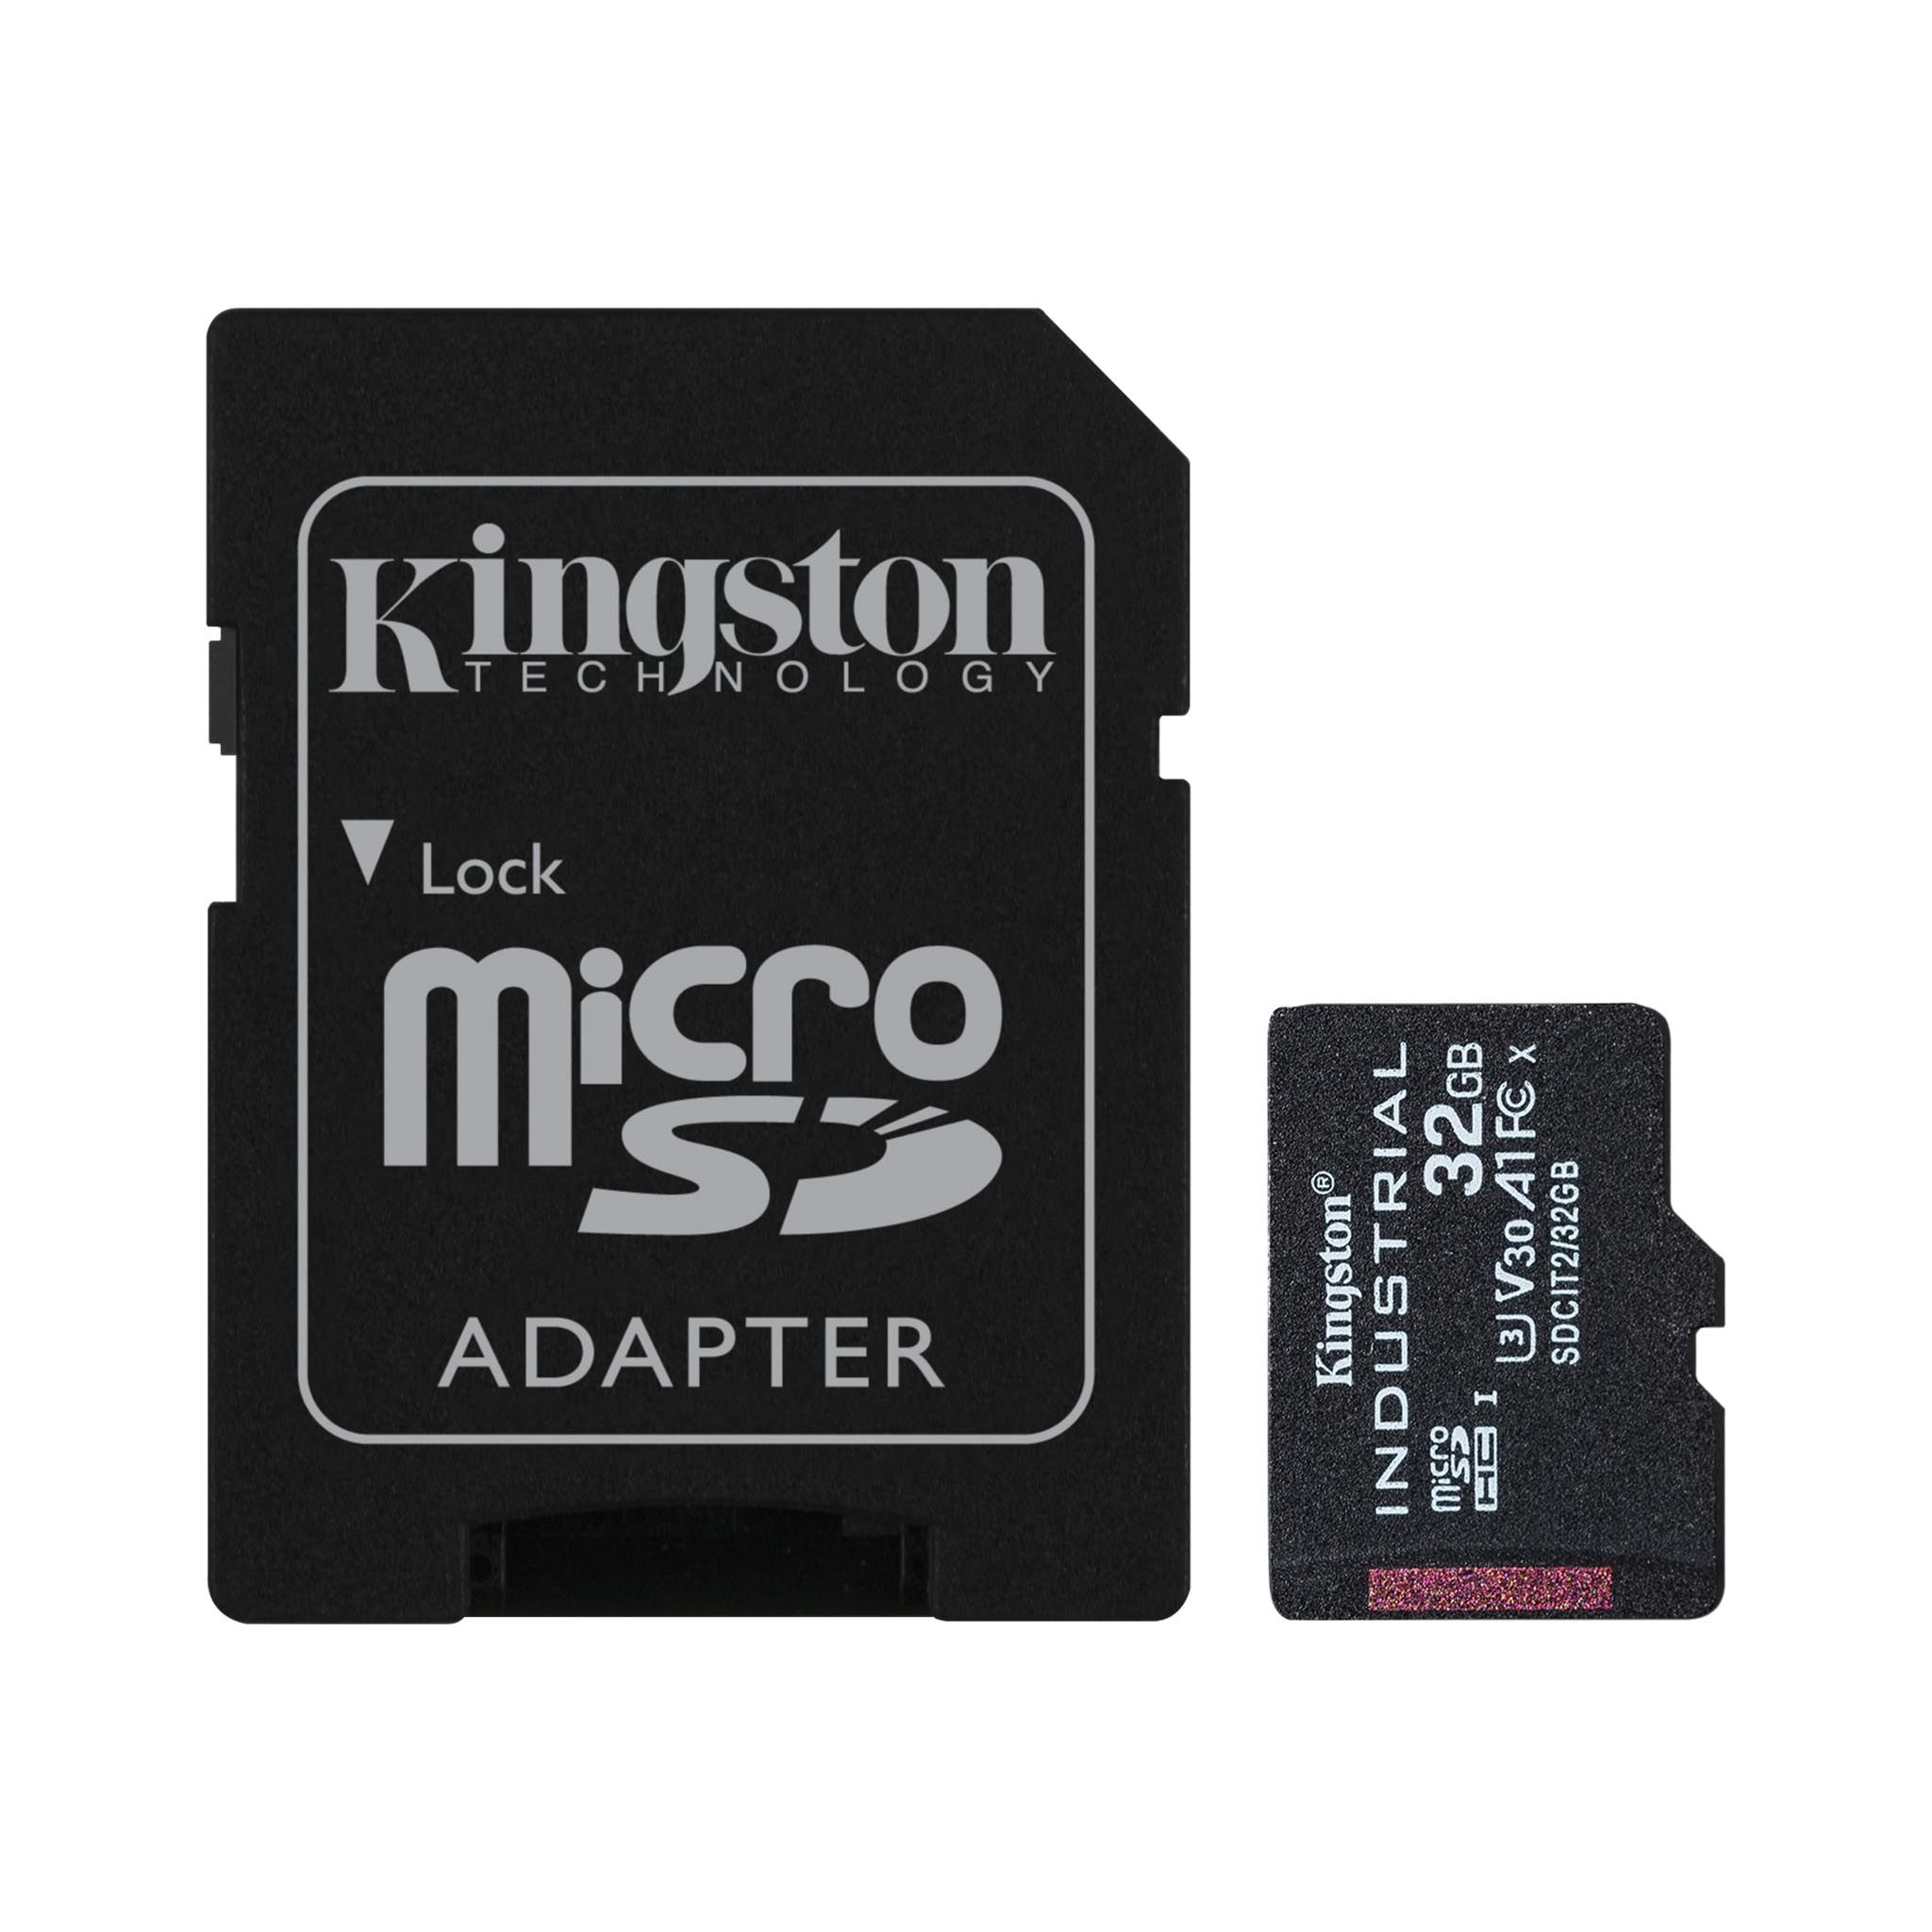 90MBs Works for Kingston Kingston Industrial Grade 16GB Verykool i123 MicroSDHC Card Verified by SanFlash.